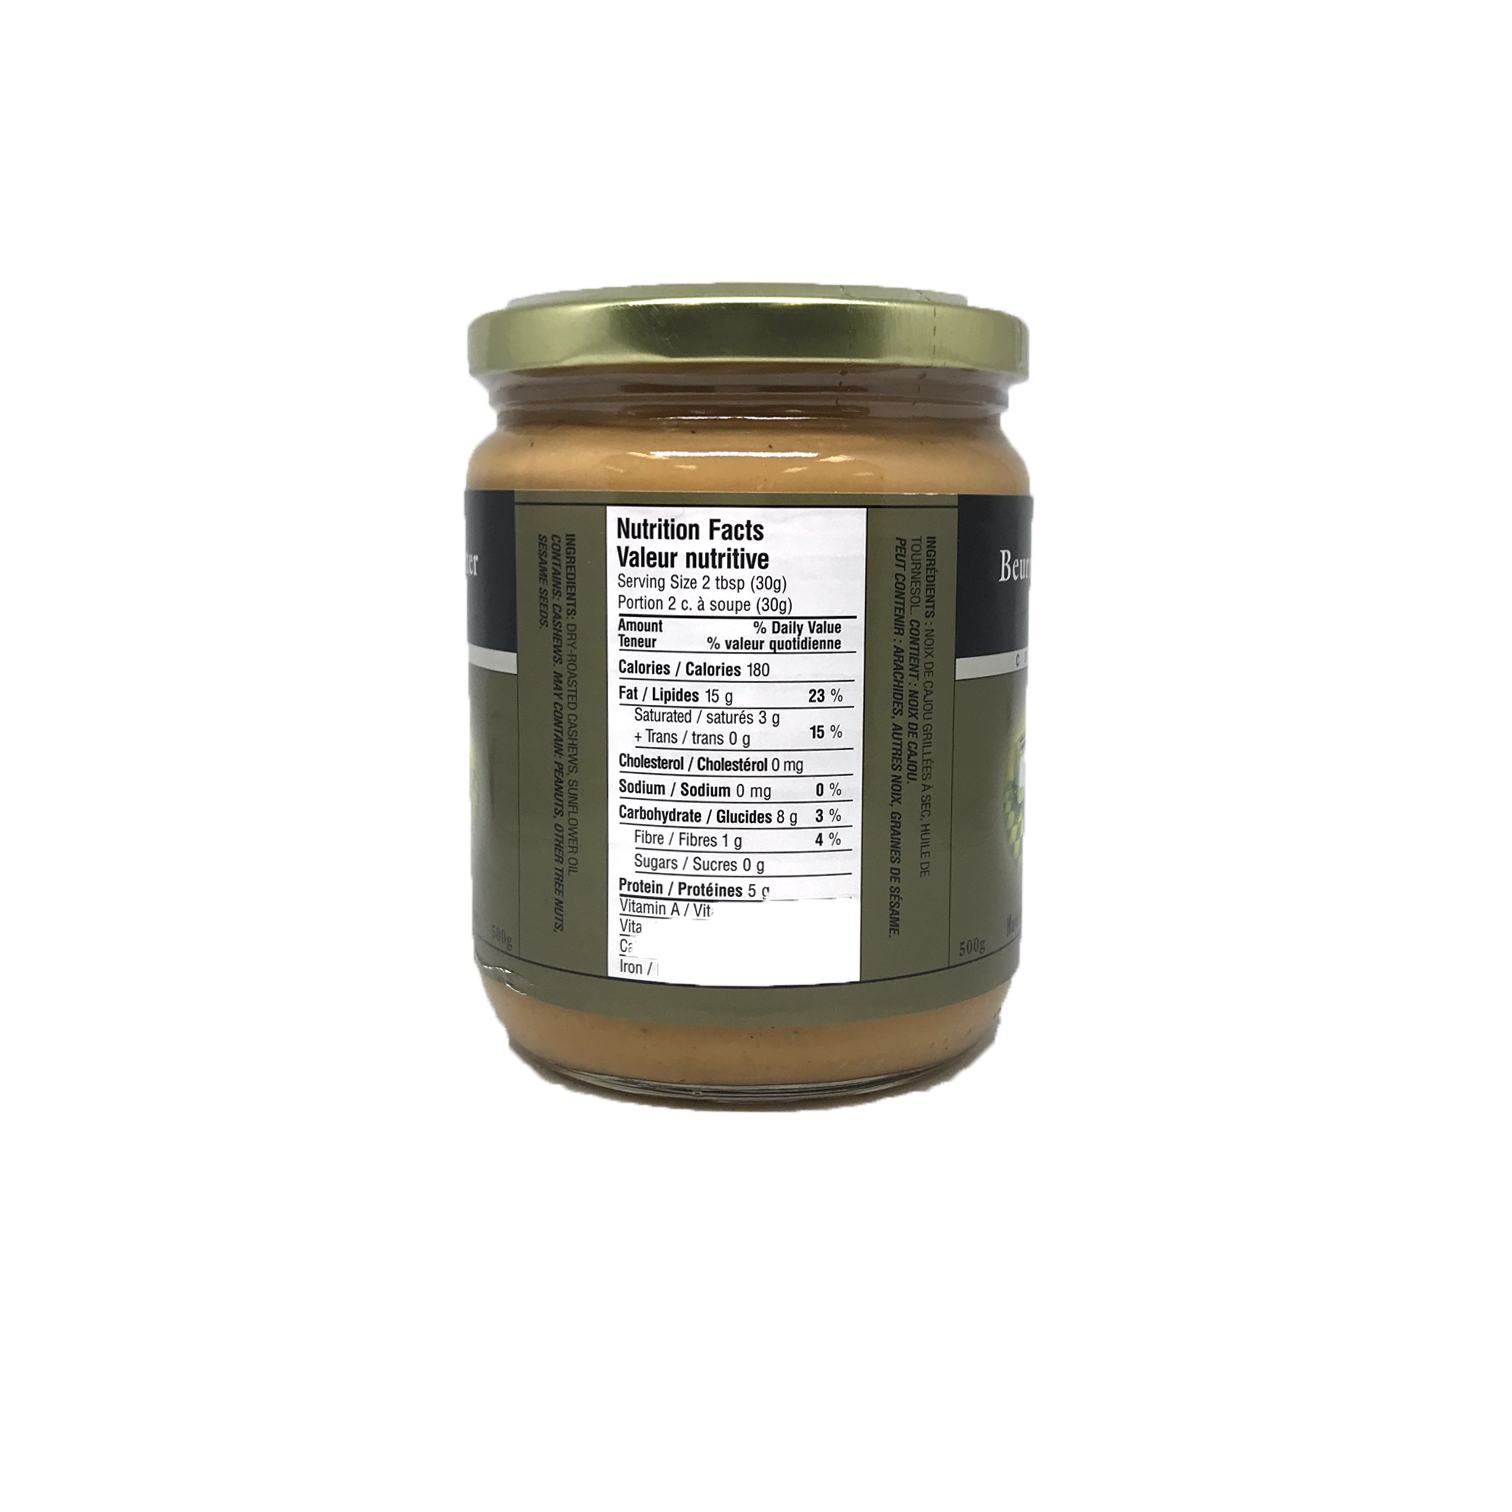 Nuts to You Cashew Butter 500g